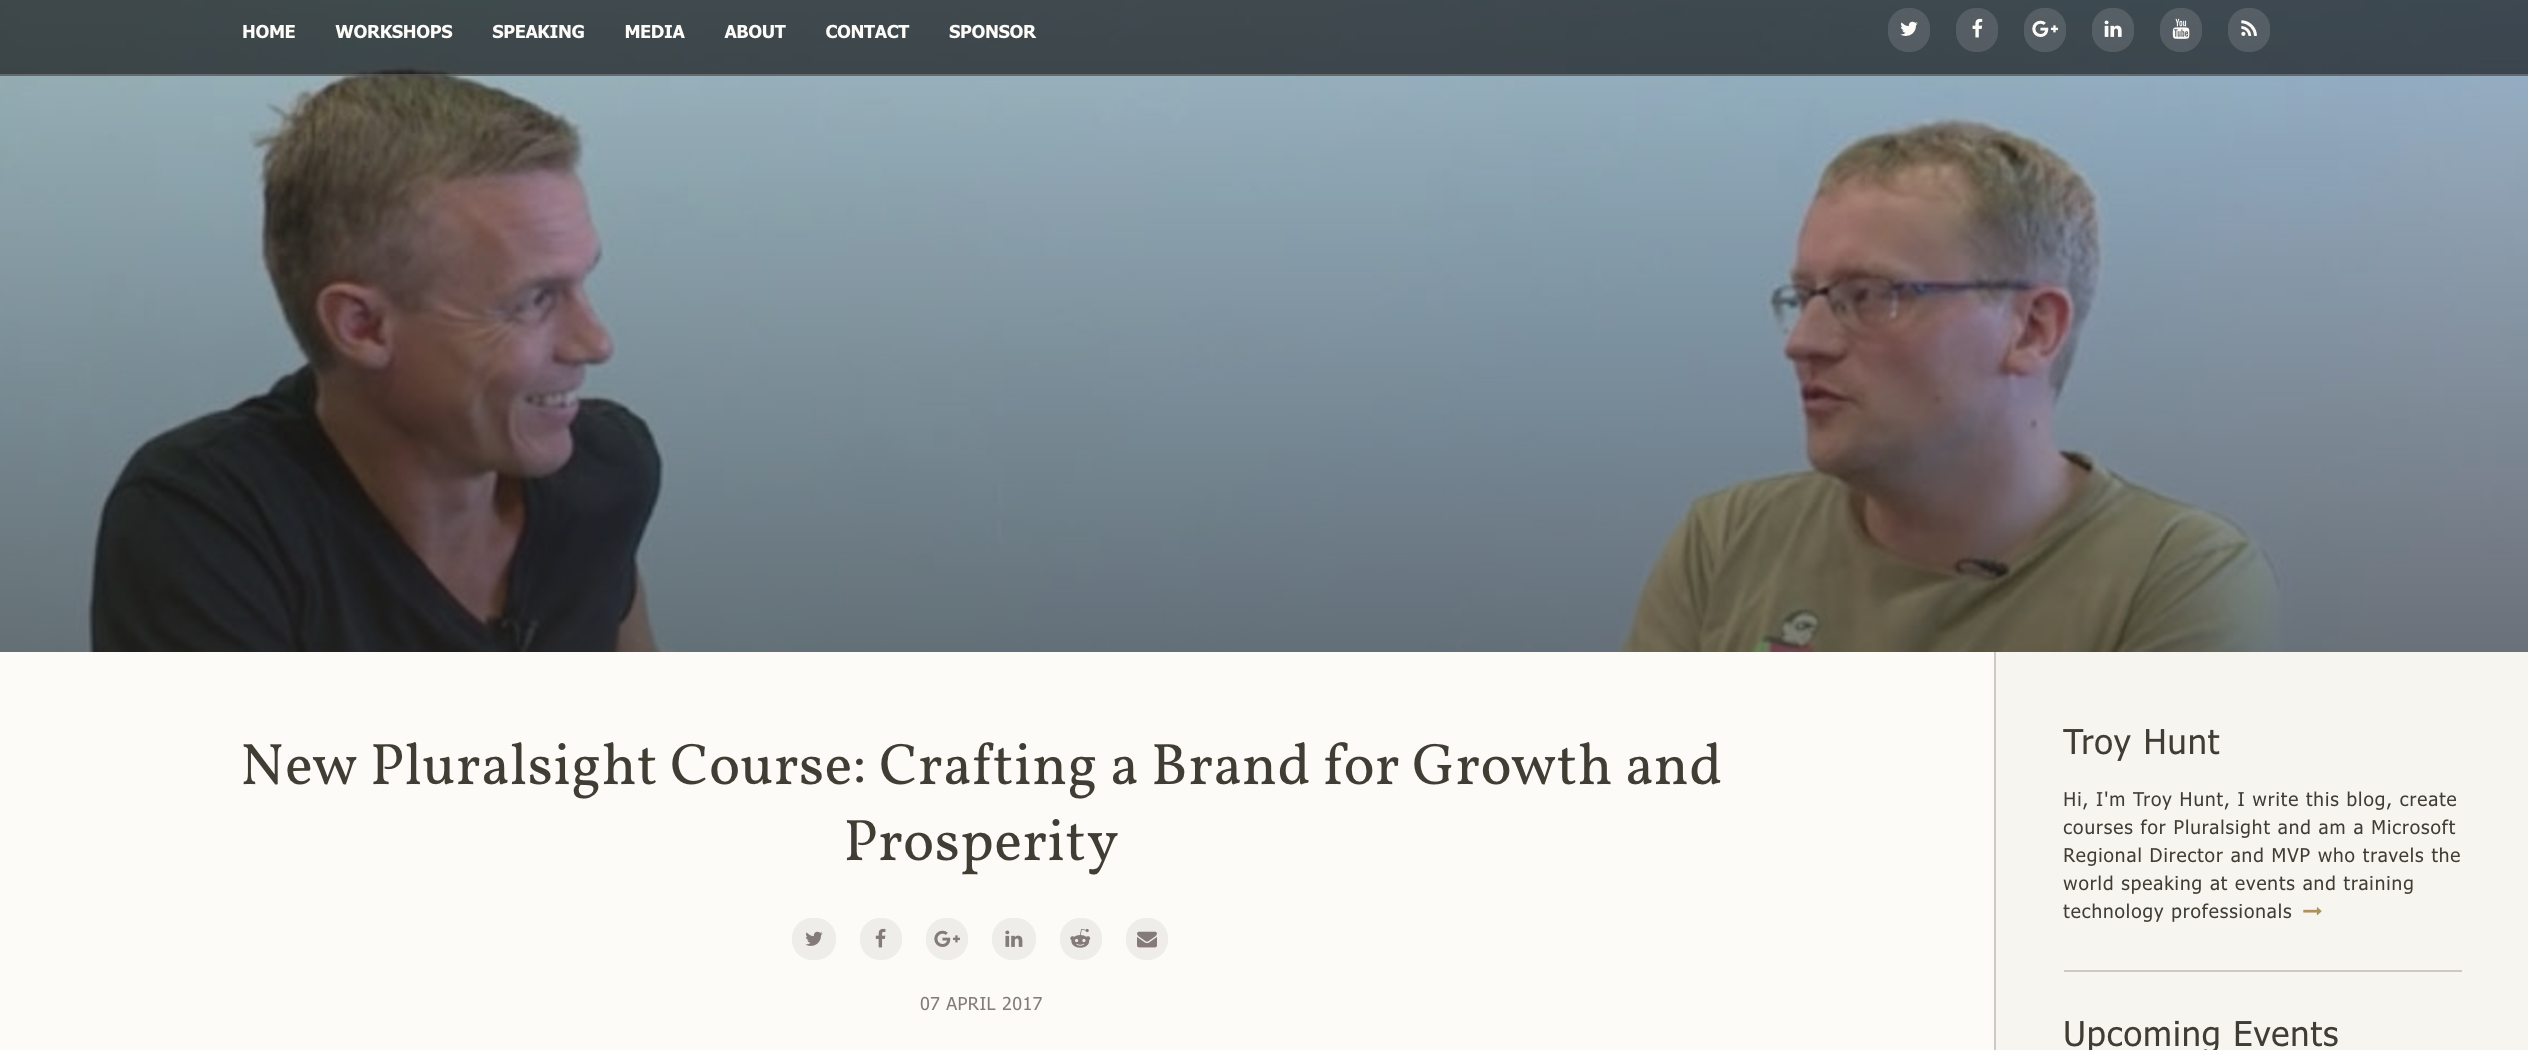 Crafting a Brand for Growth and Prosperity